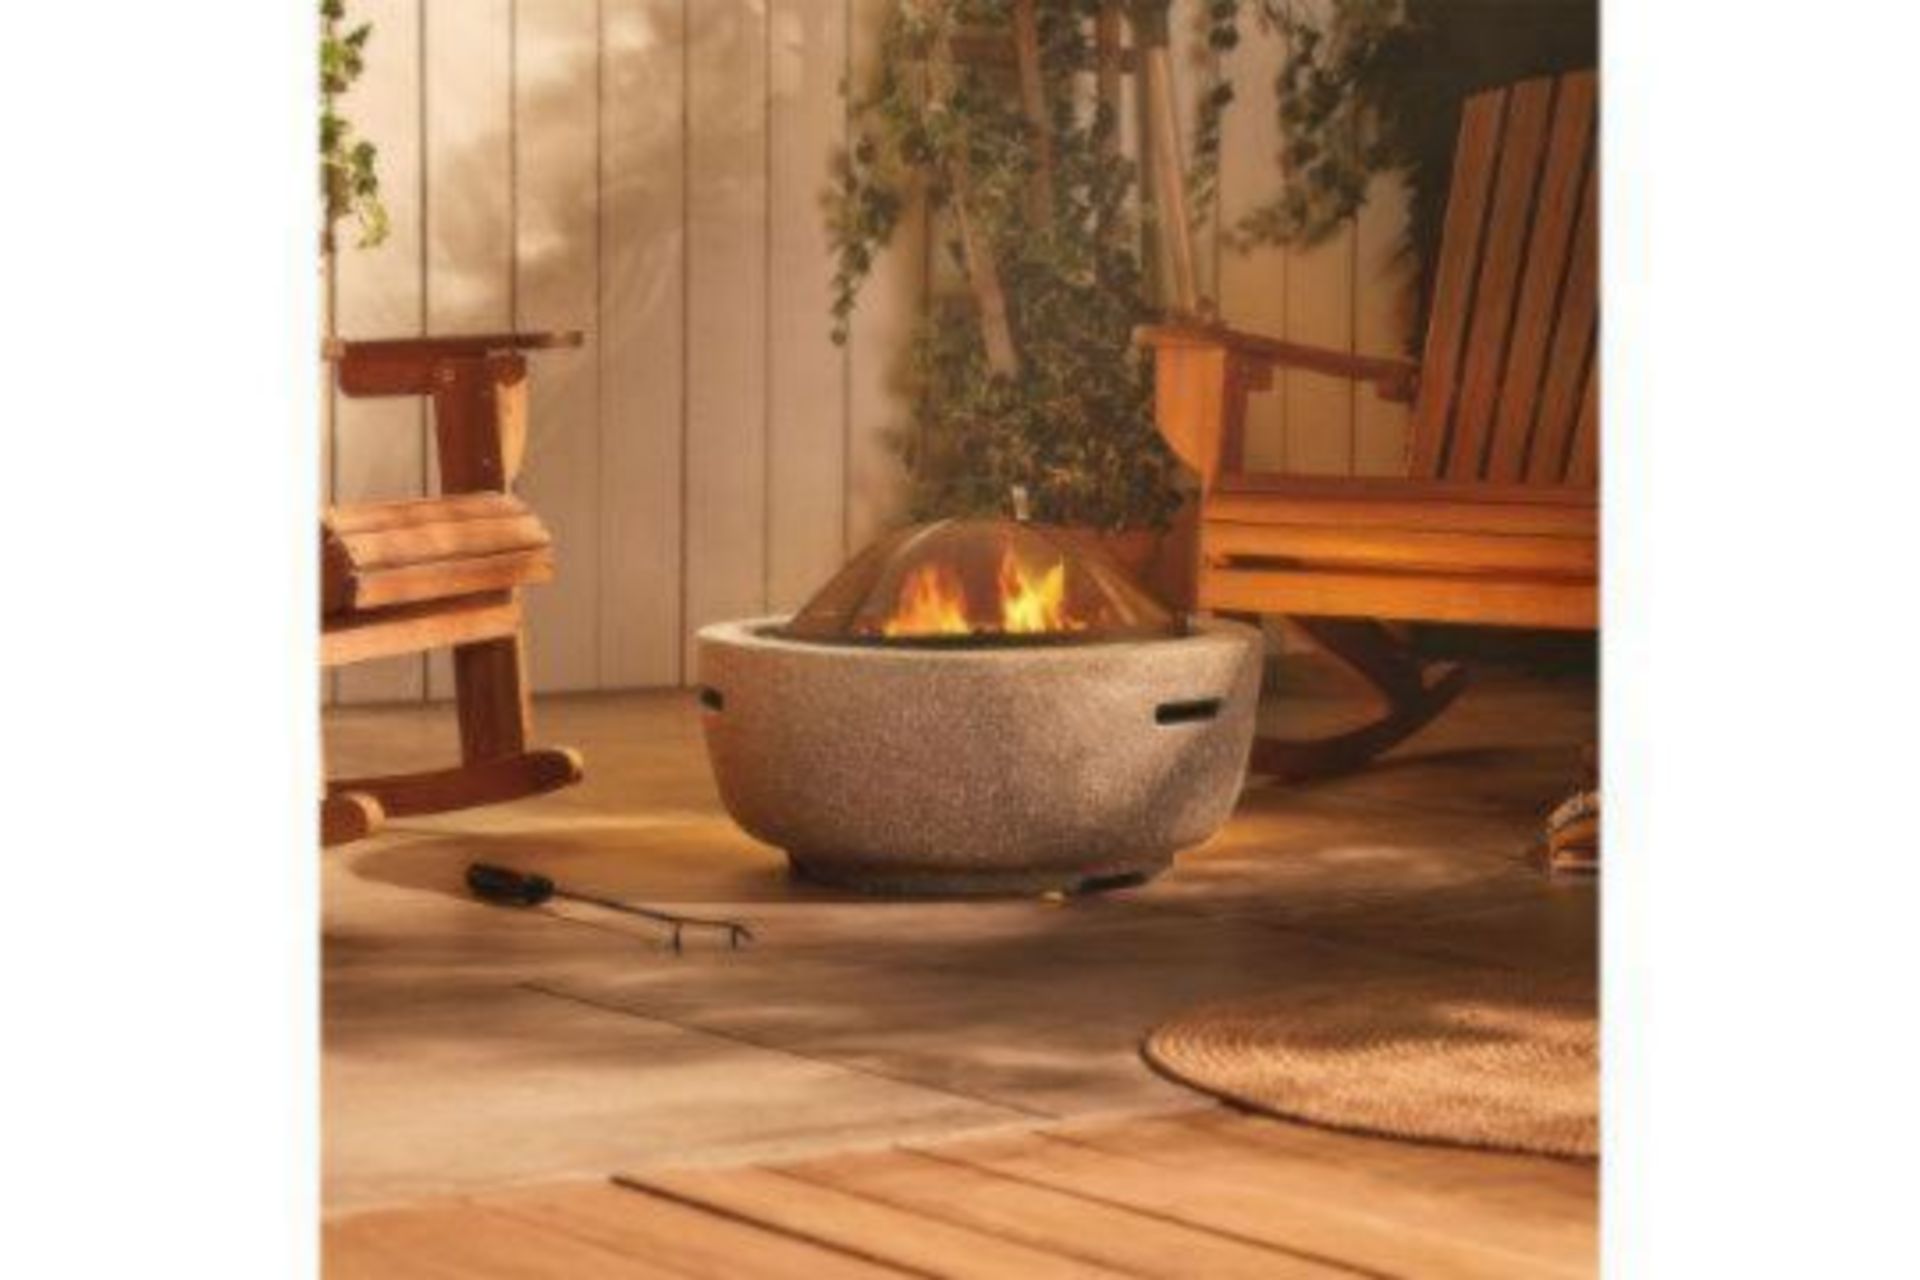 New Boxed - Round MgO Fire Pit (REF702- ROW6). Don’t let the onset of evening curtail your day in